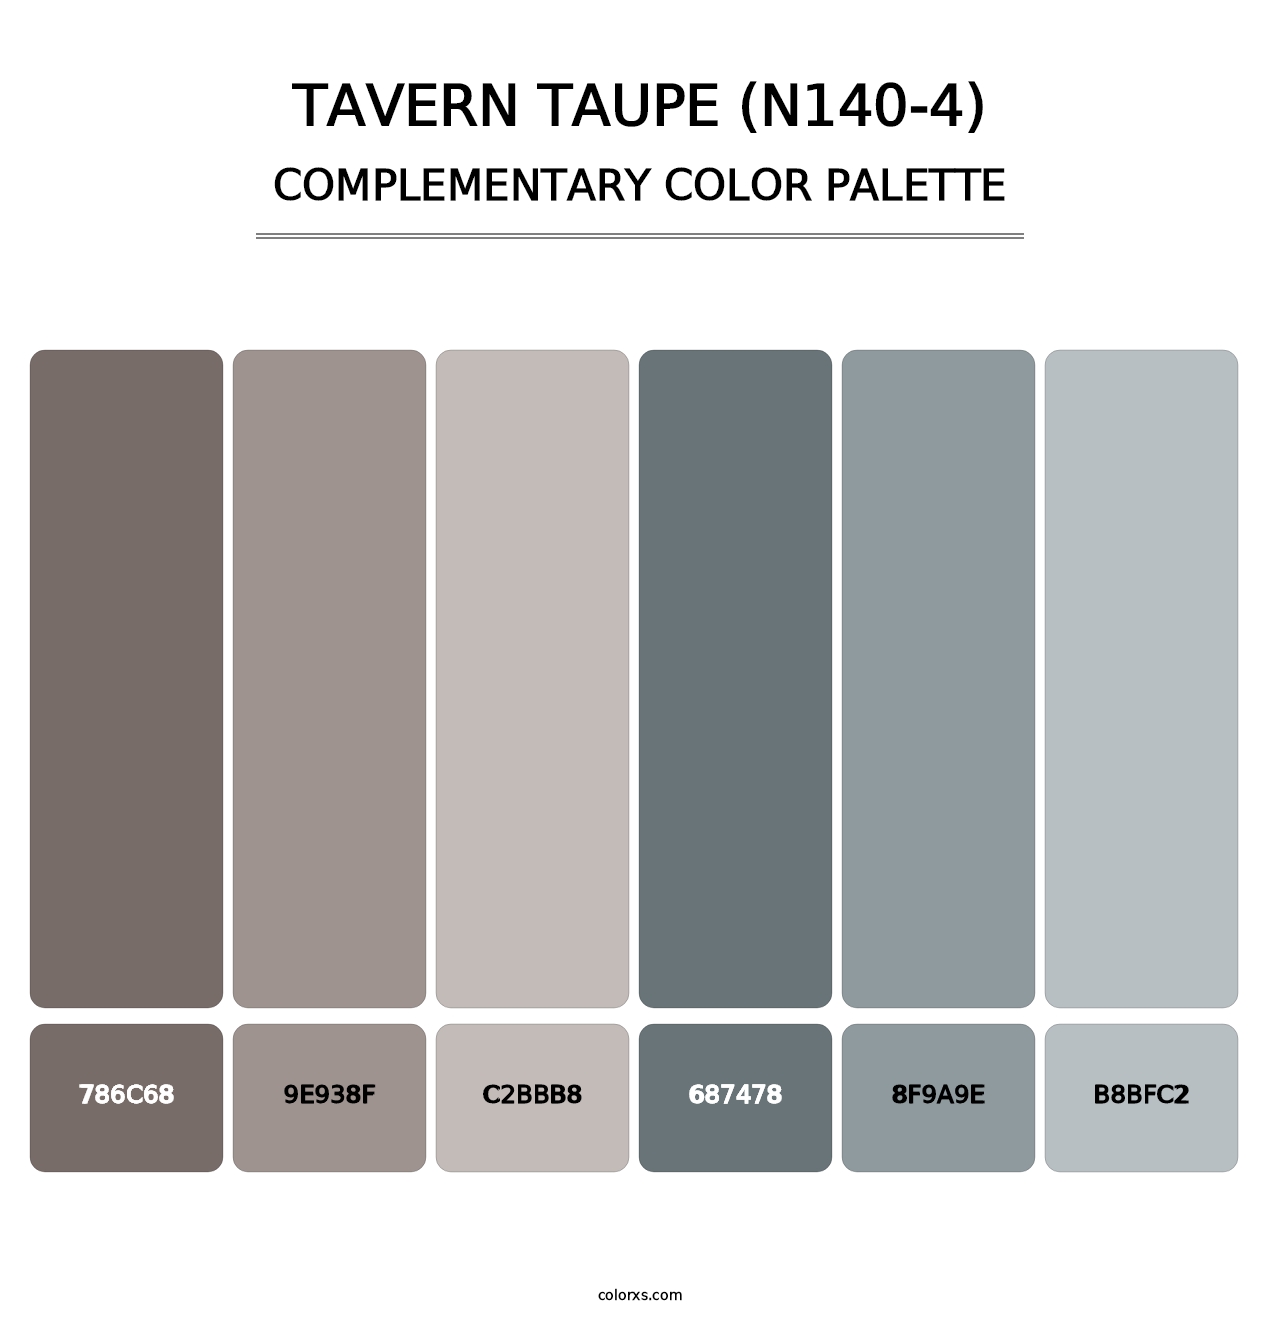 Tavern Taupe (N140-4) - Complementary Color Palette